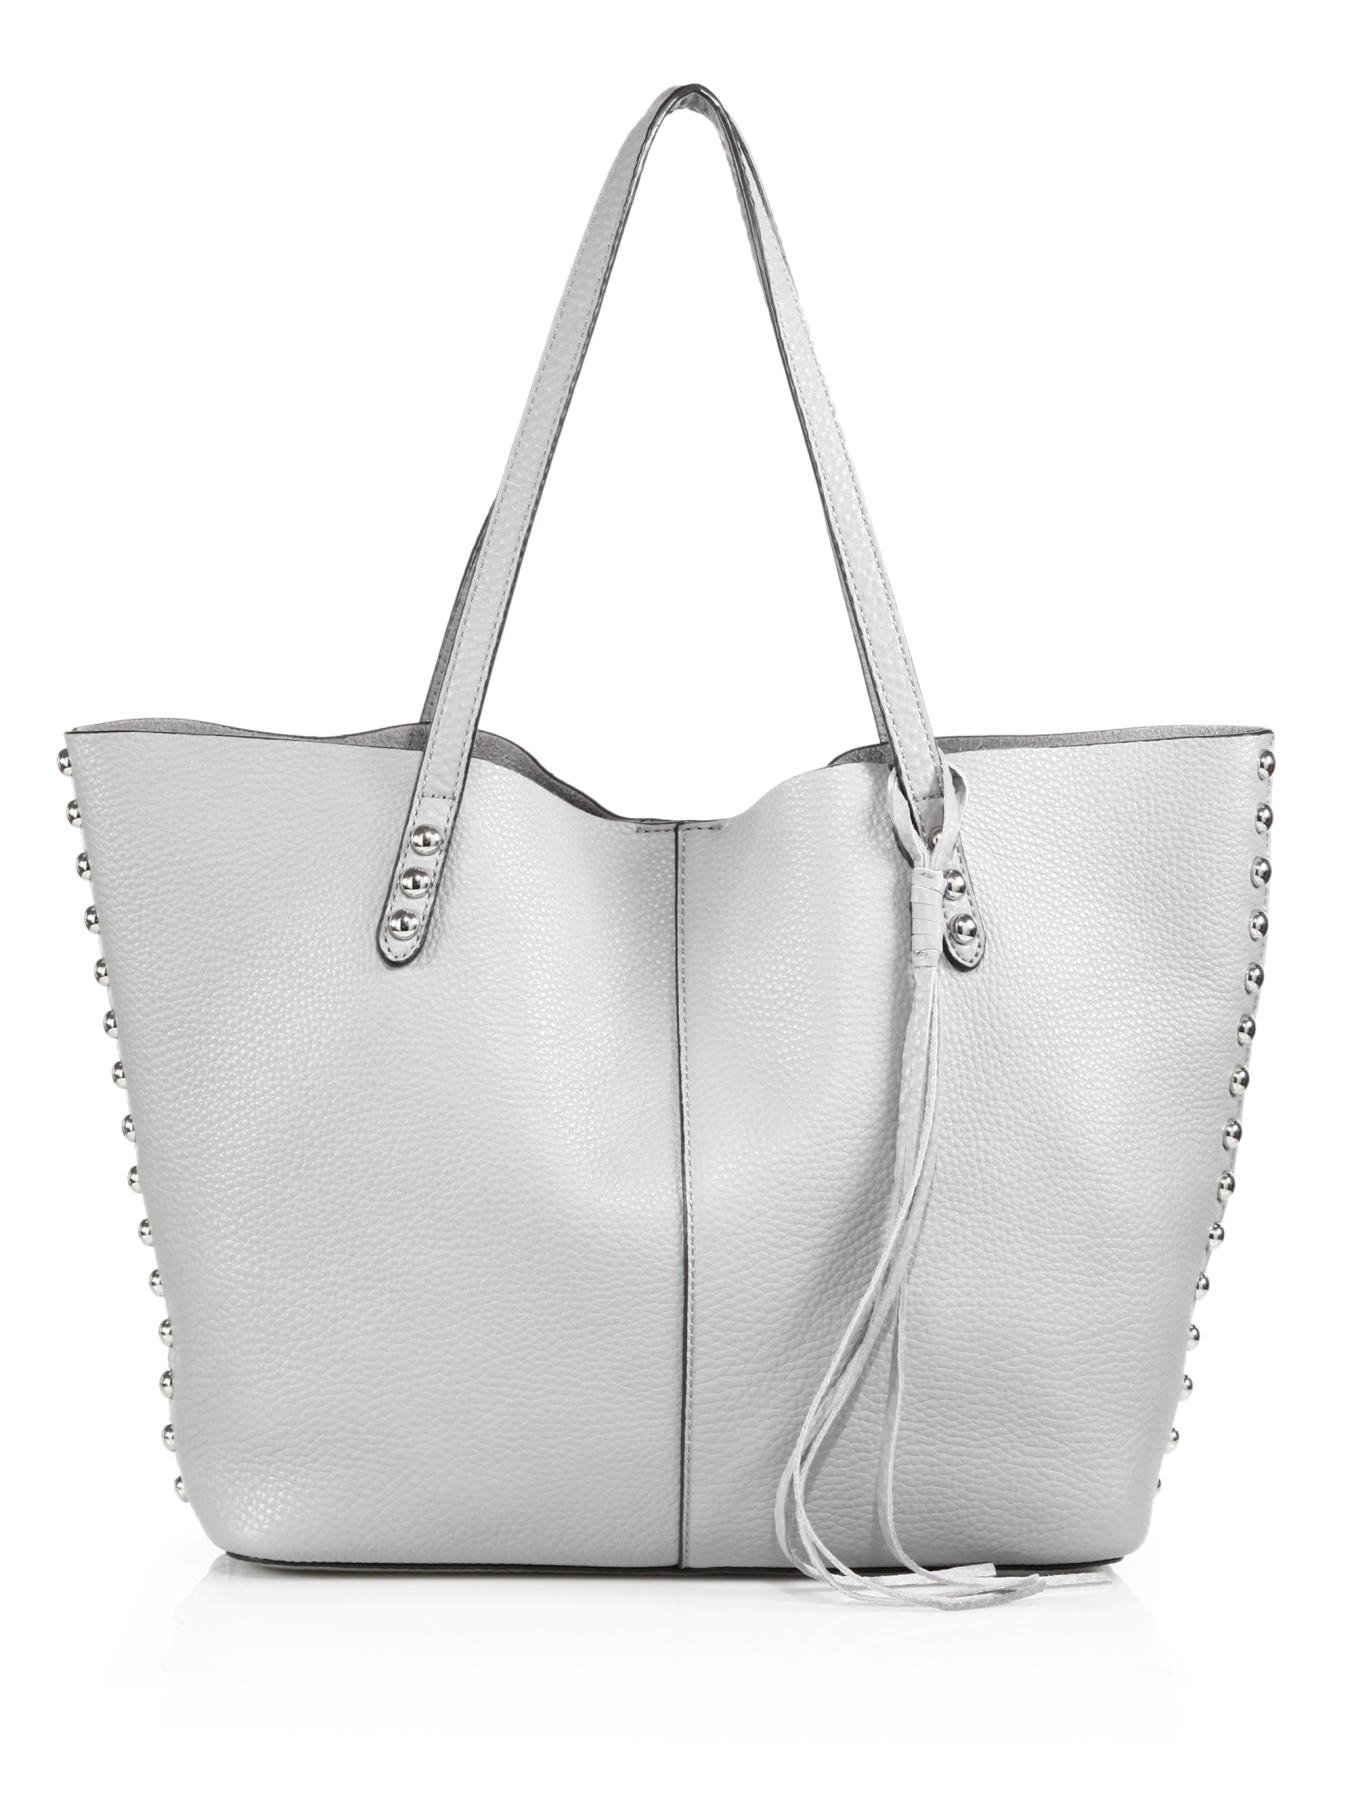 Rebecca Minkoff Studded Leather Tote in Gray | Lyst